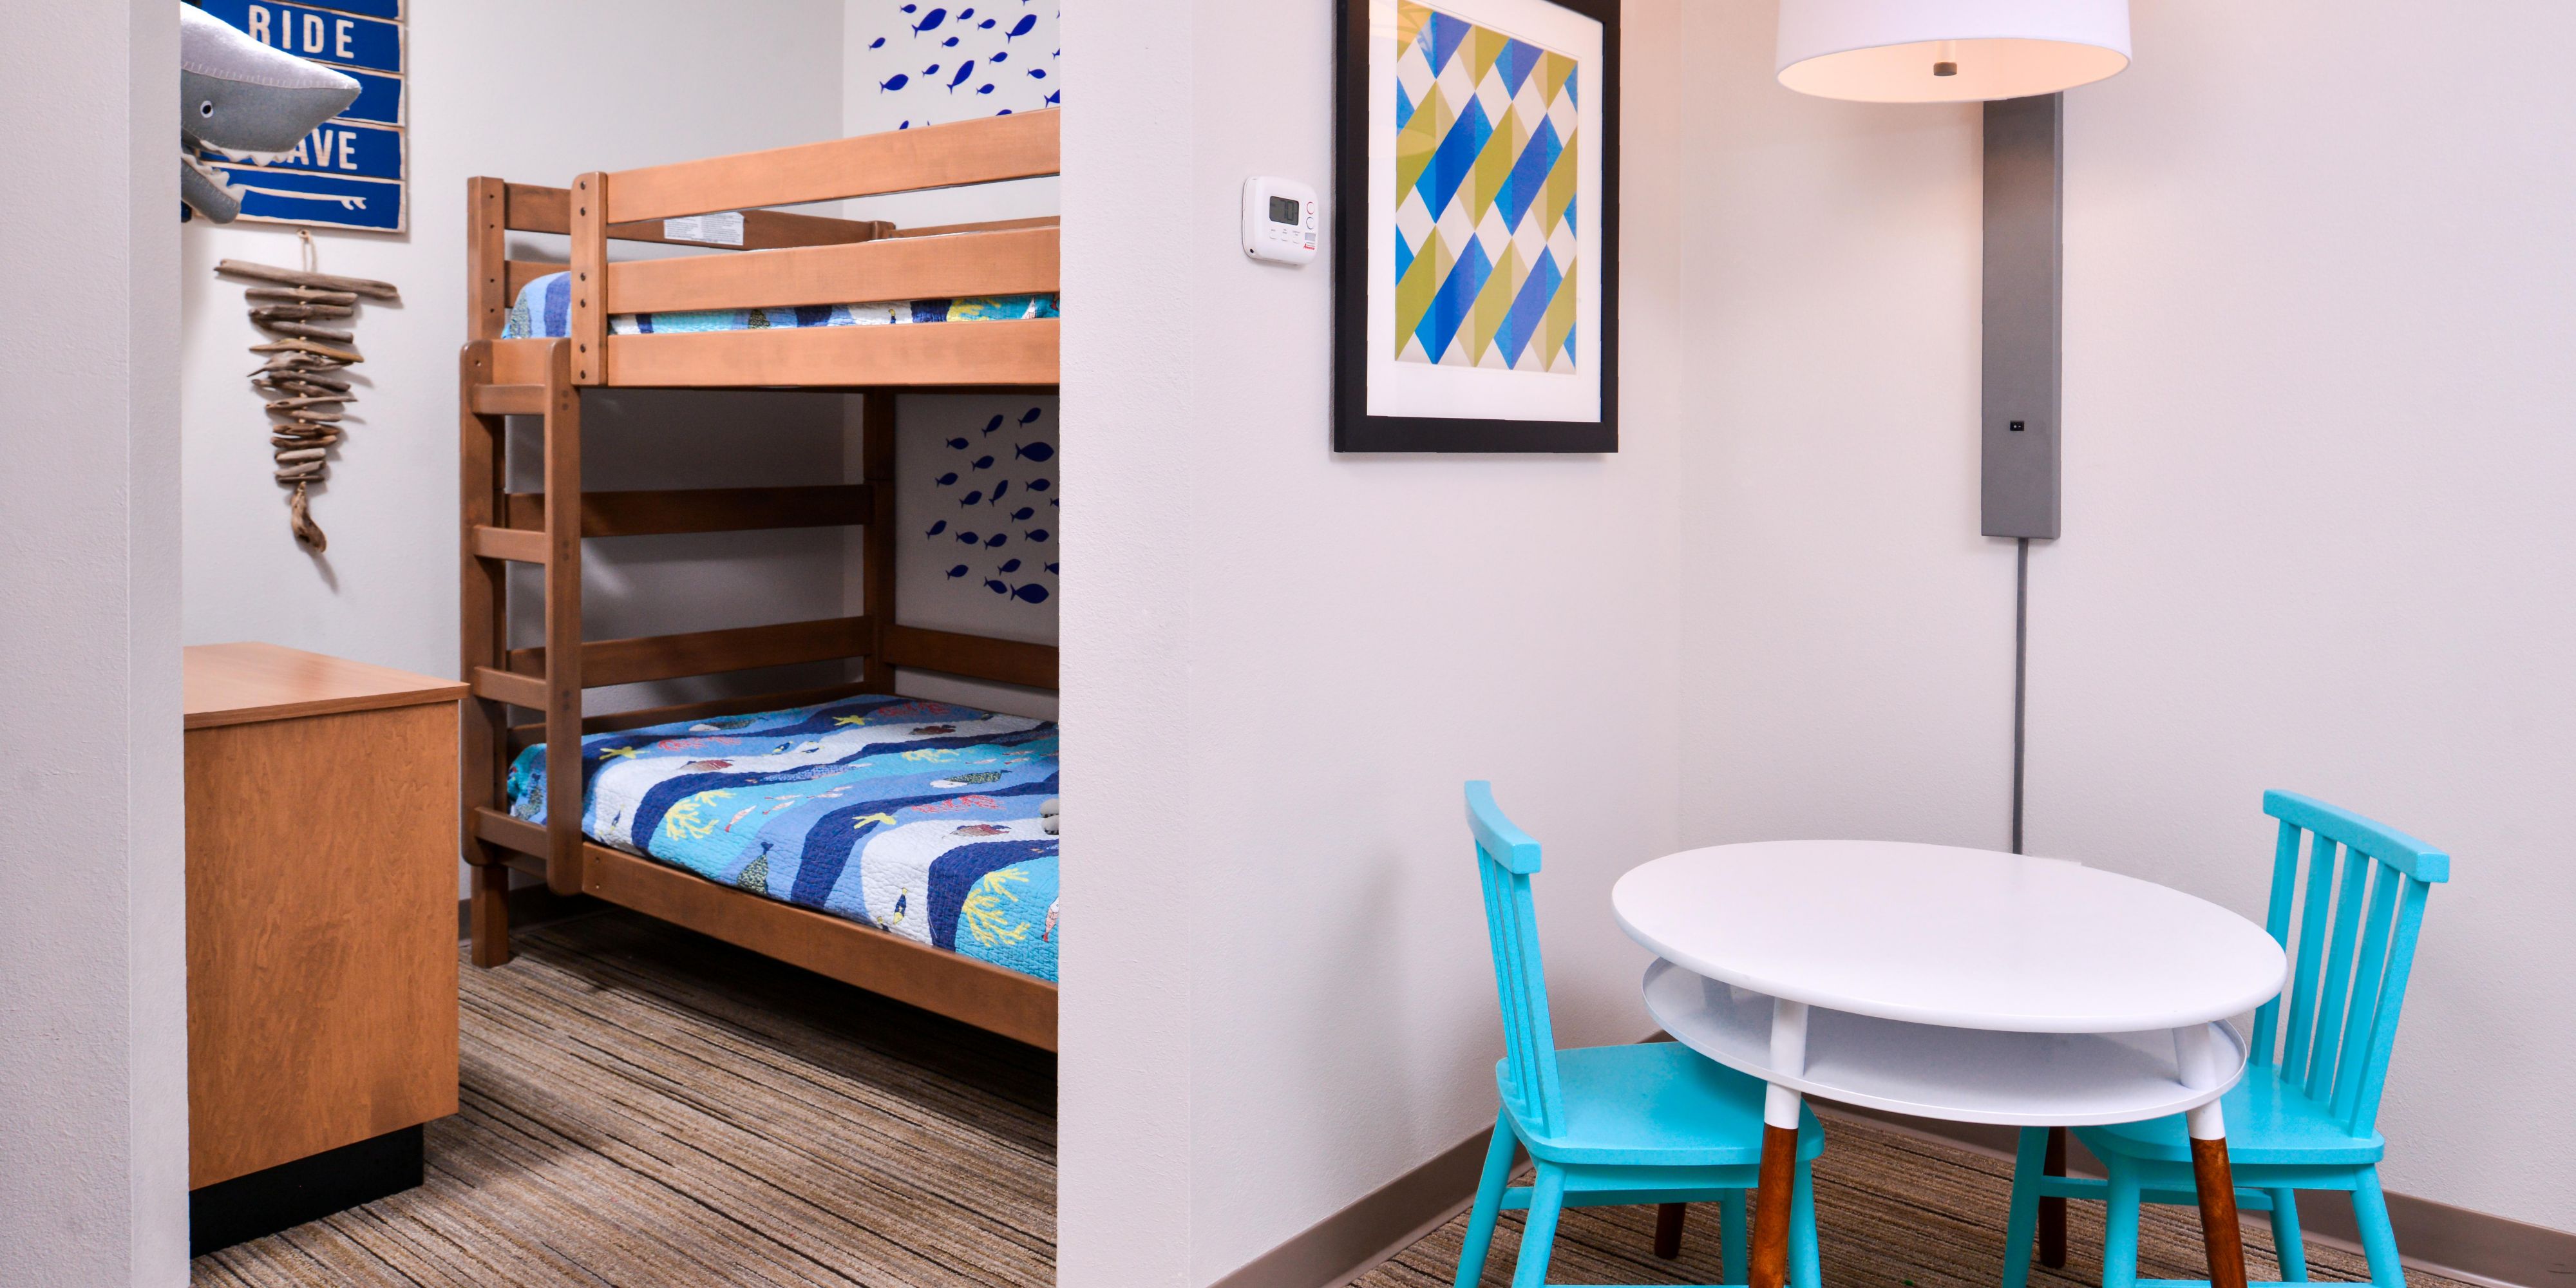 Pack up the kids and enjoy a cool getaway in our sea-themed family suite featuring twin bunk beds, a king bed, kids play table, microwave, and mini refrigerator!